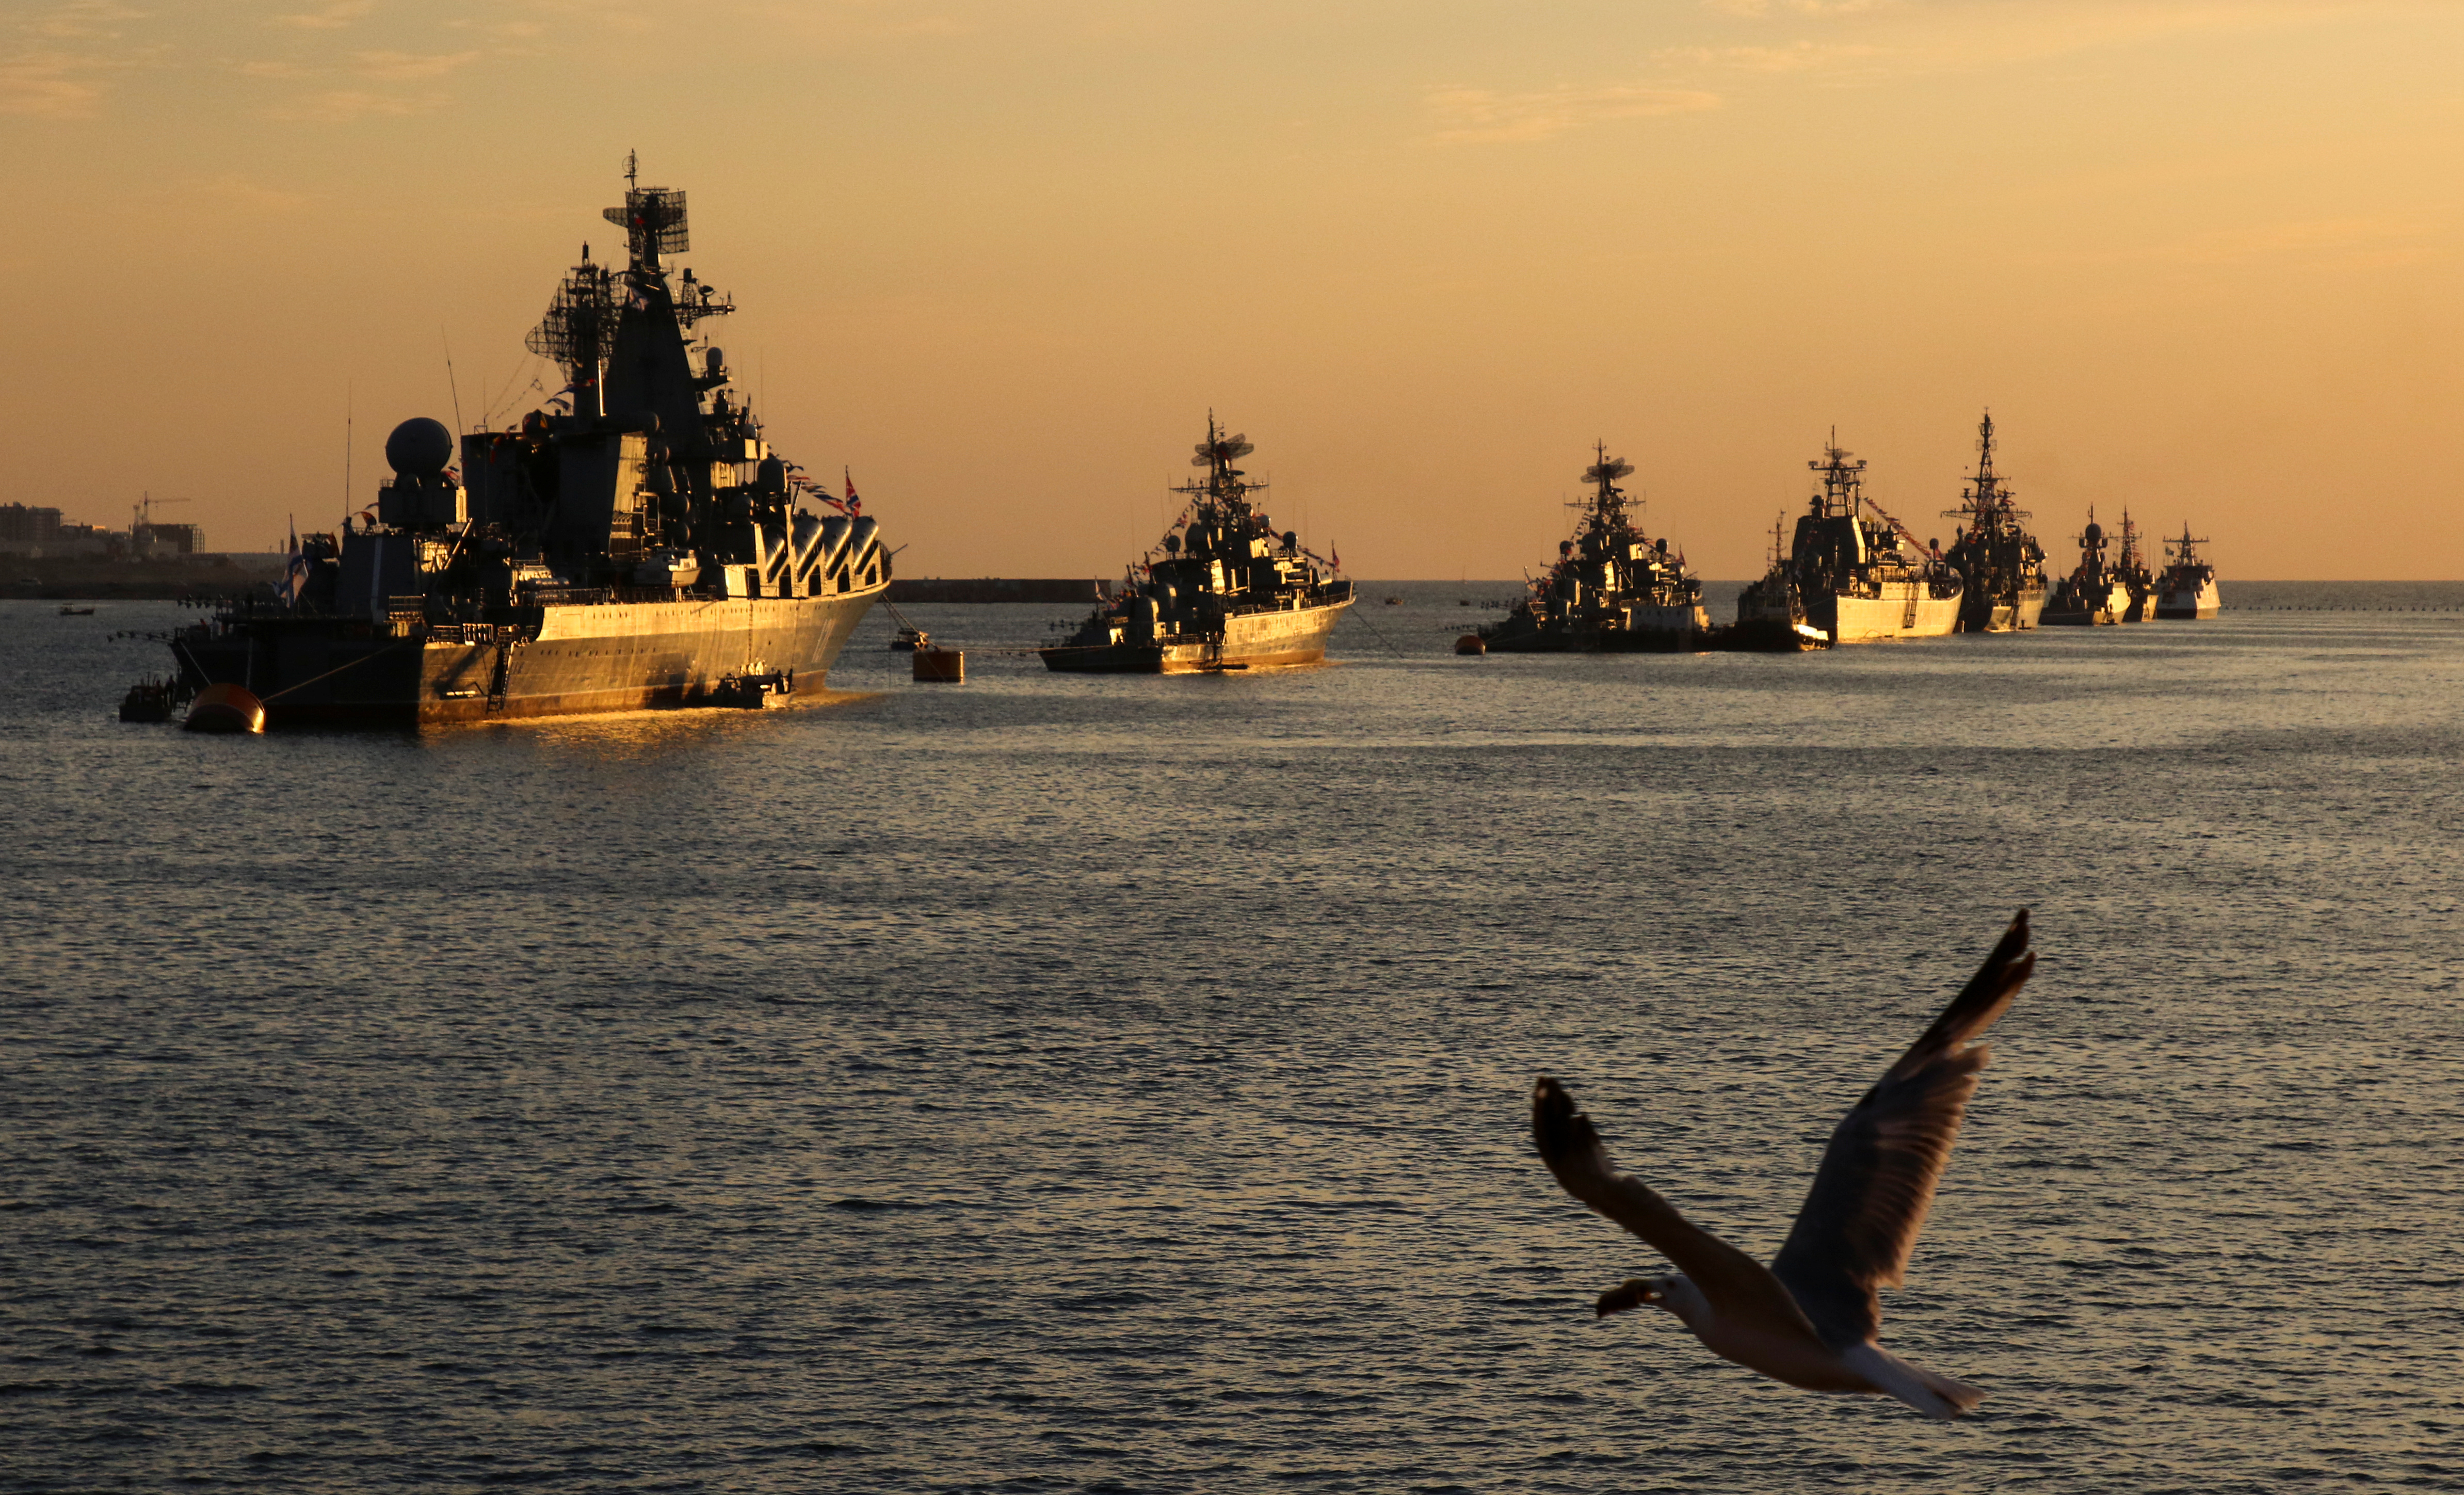 A seagull flies with a catch as Russian warships are seen during sunset ahead of the Navy Day parade in the Black Sea port of Sevastopol